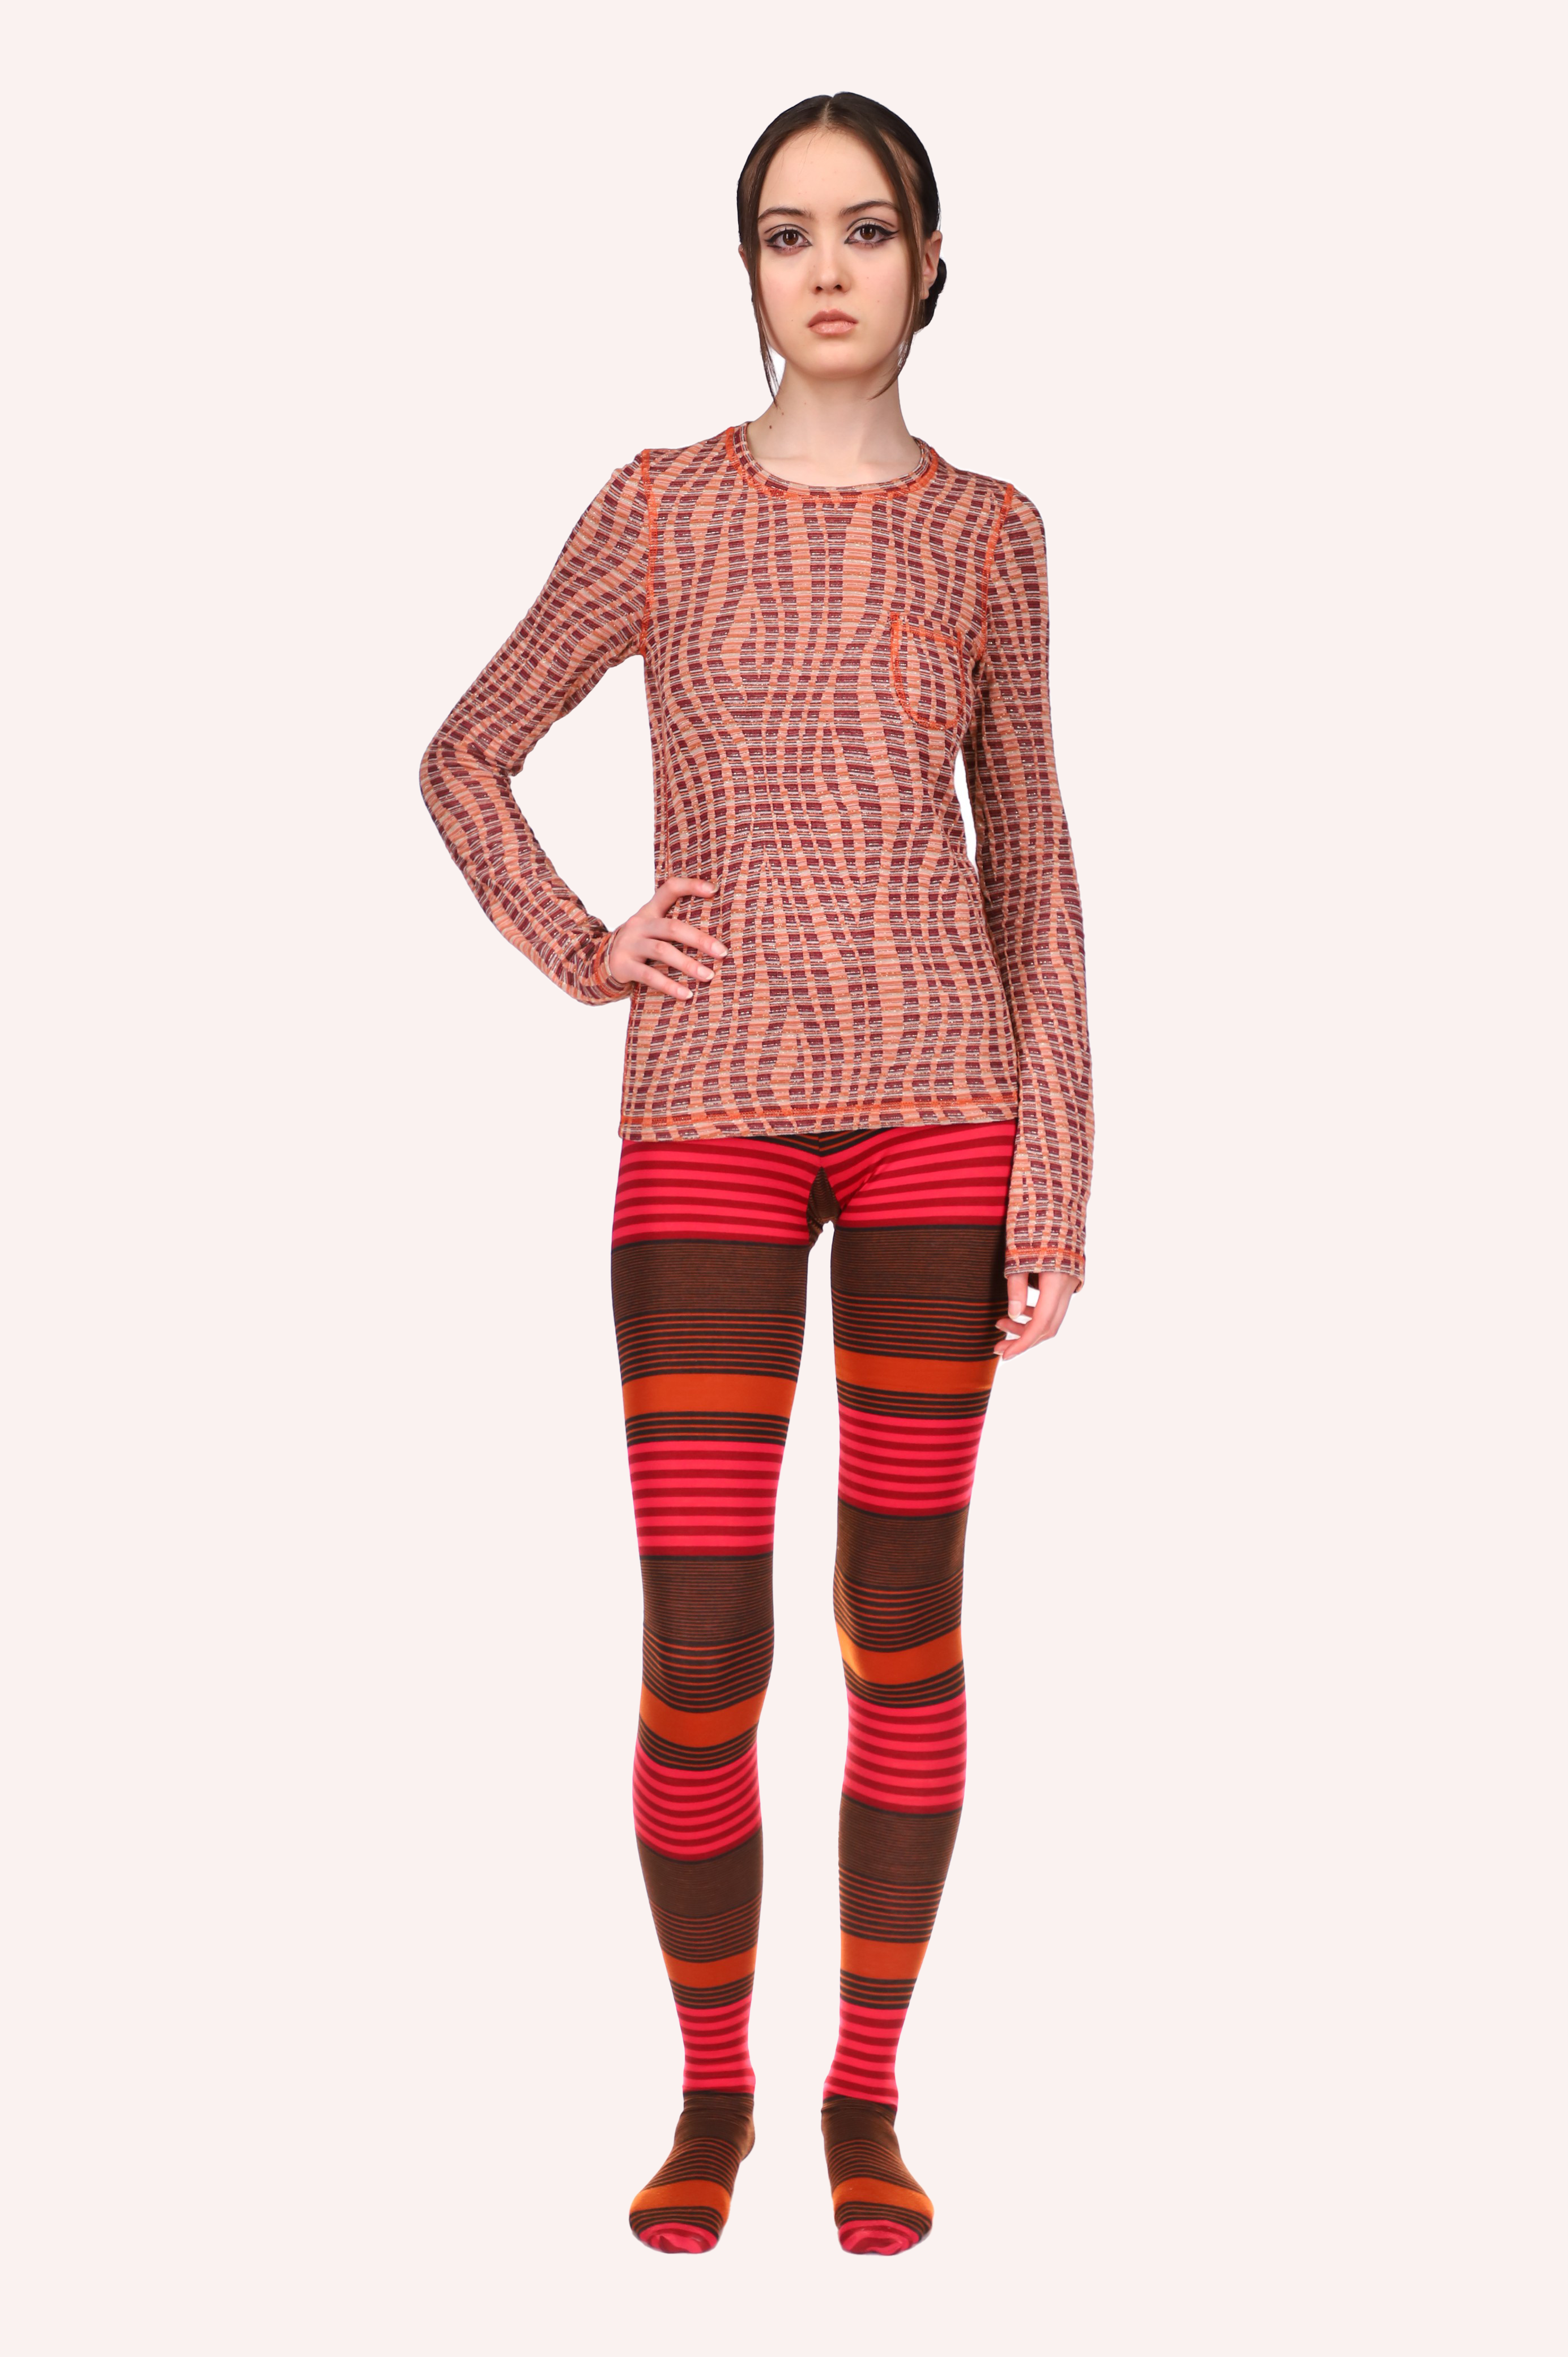 Top with long sleeves, crew neck collar, Dark orange squares in wave pattern, highlighted orange seams, and a pocket.